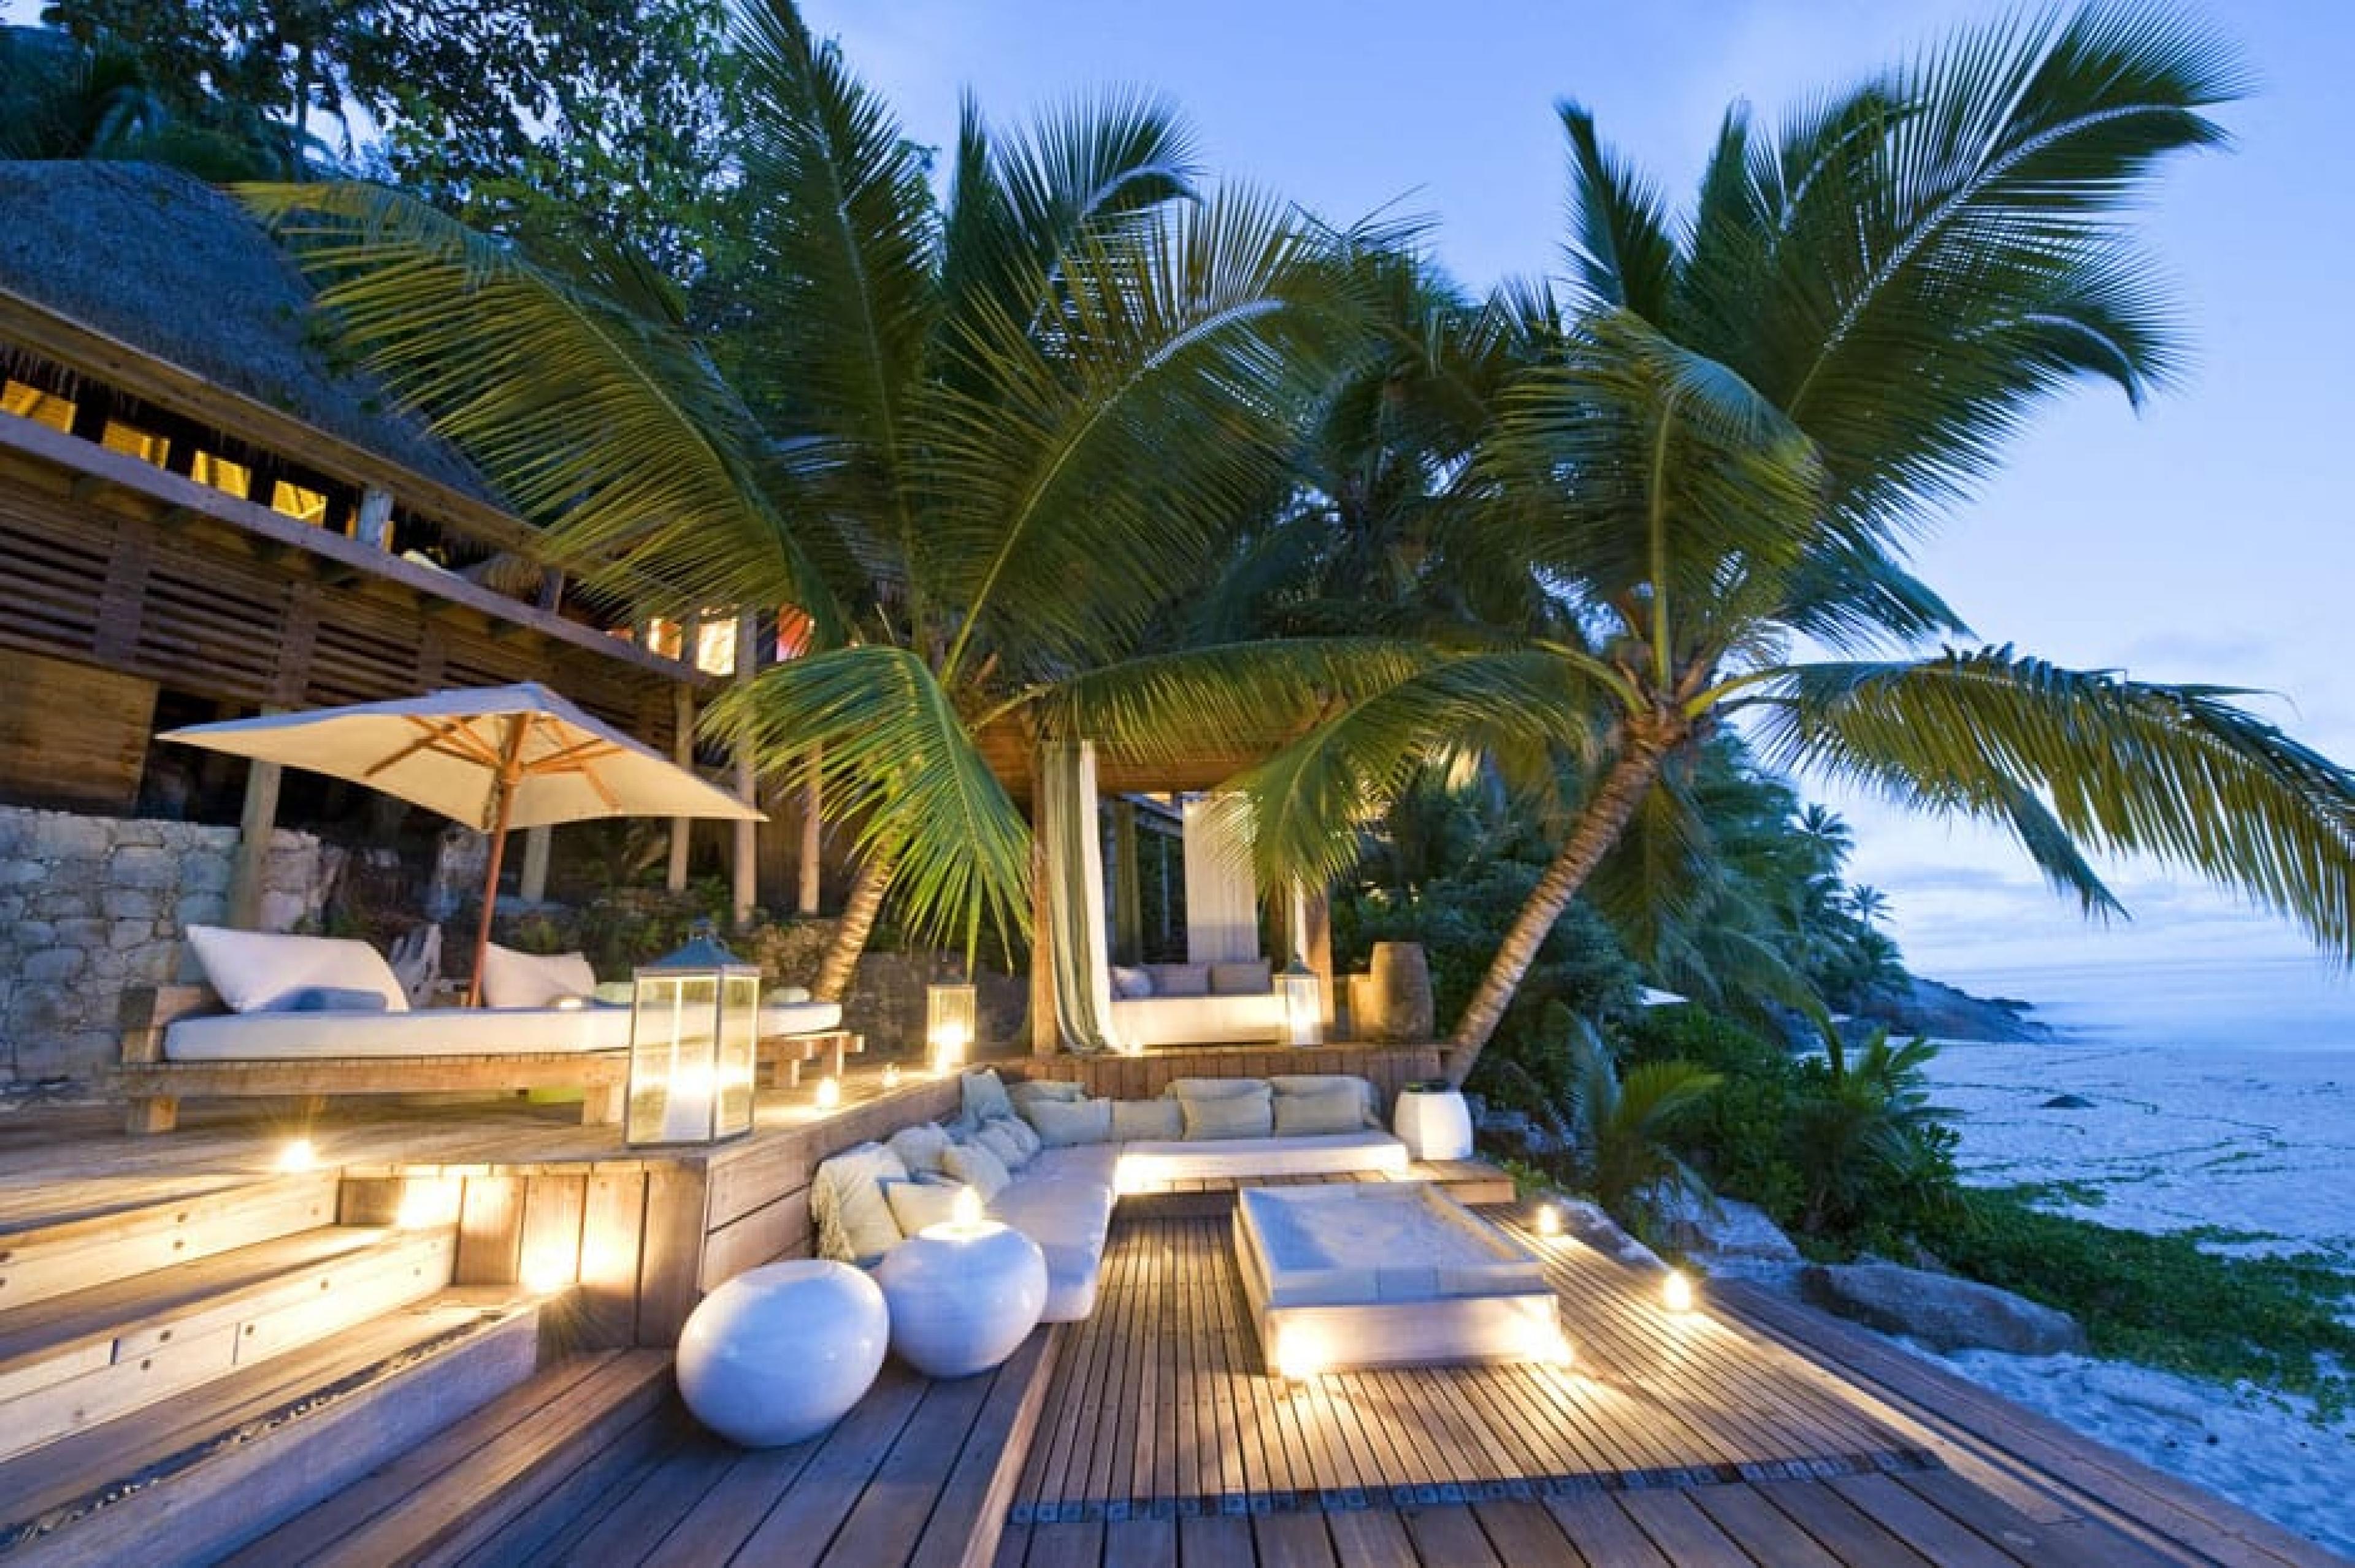 Lounge at North Island, Seychelles - Courtesy Mike Myers